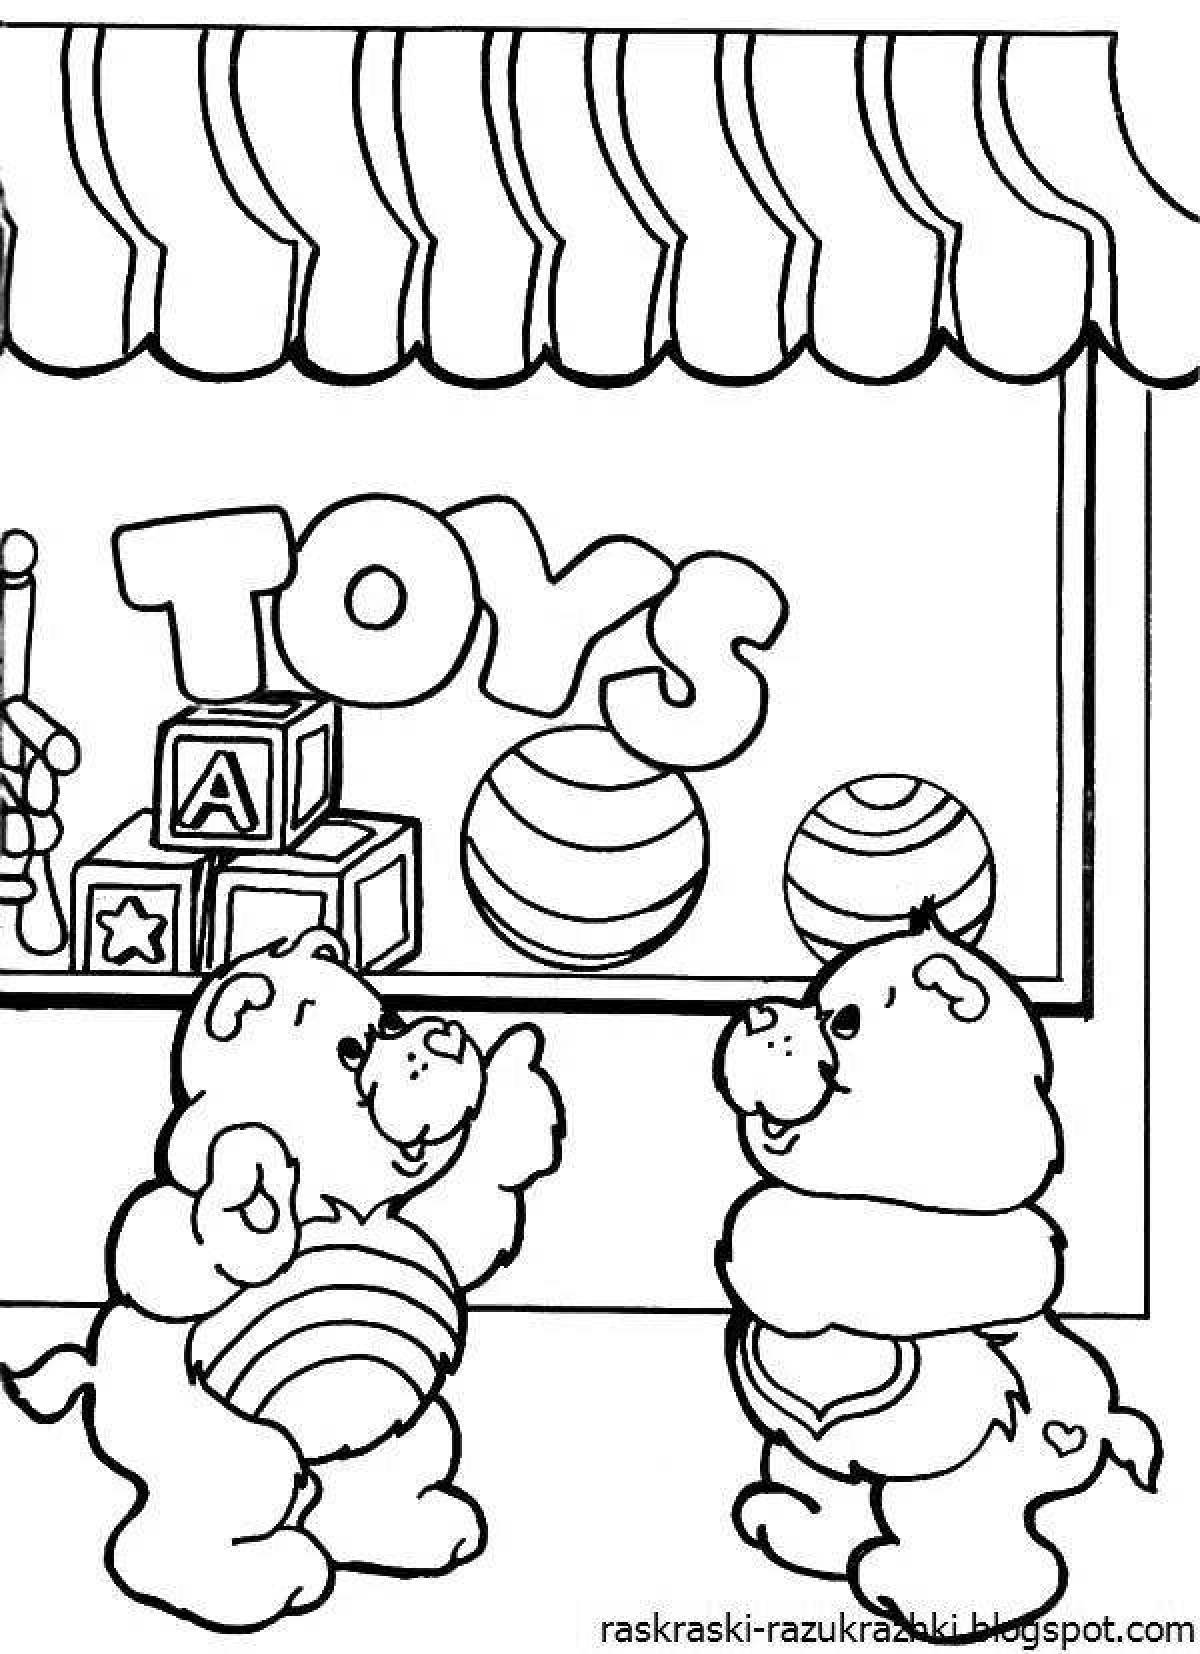 Playful shop front coloring page